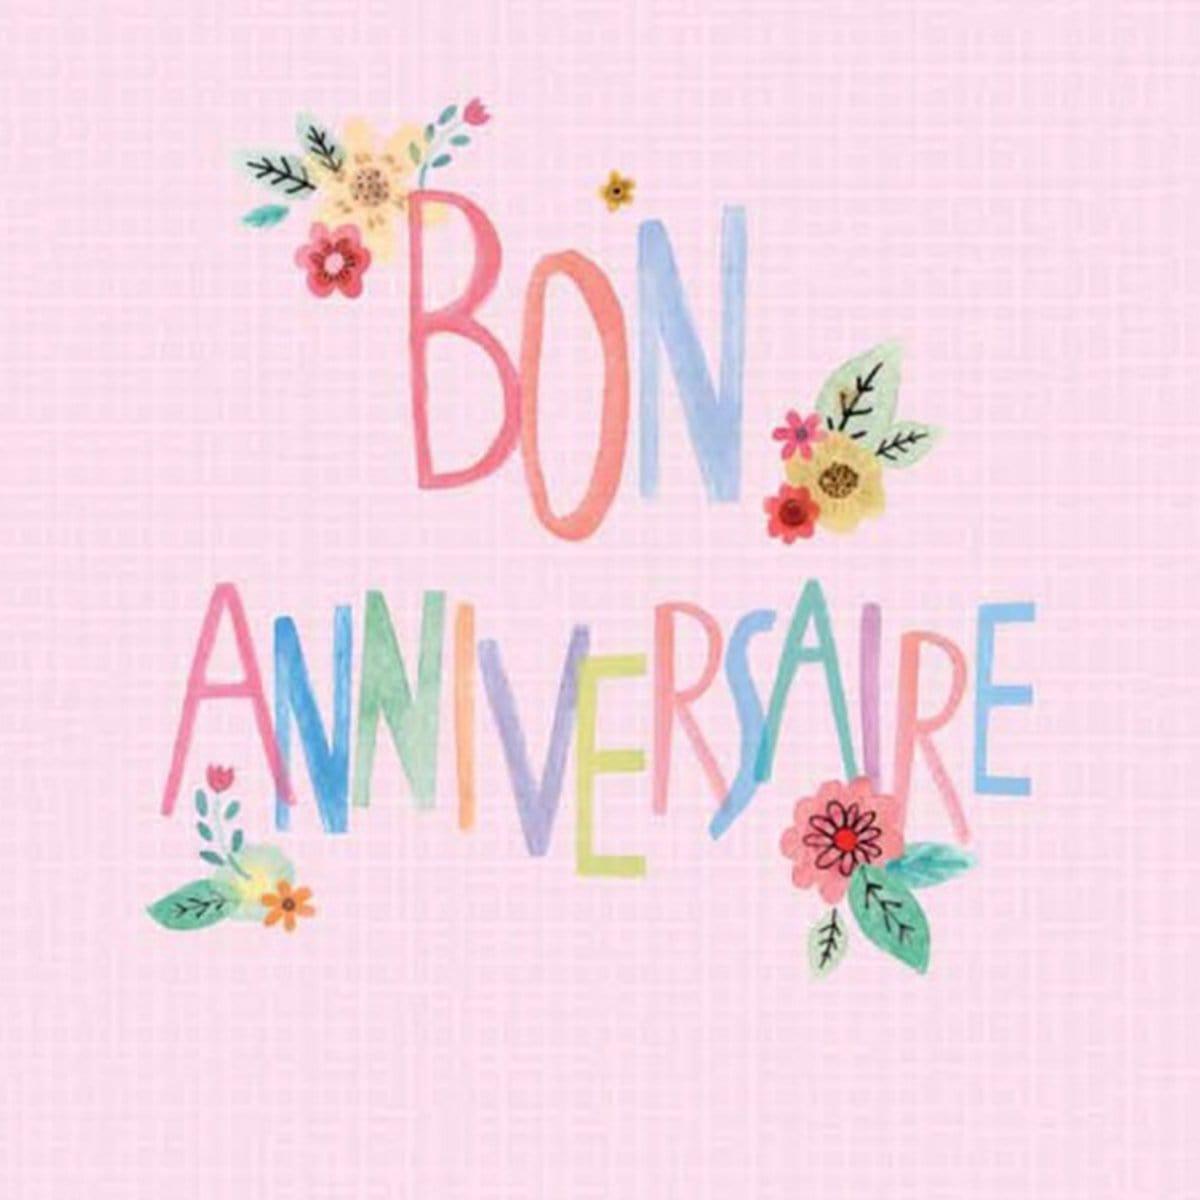 Buy Greeting Cards Bonbon - Bon Anniversaire sold at Party Expert